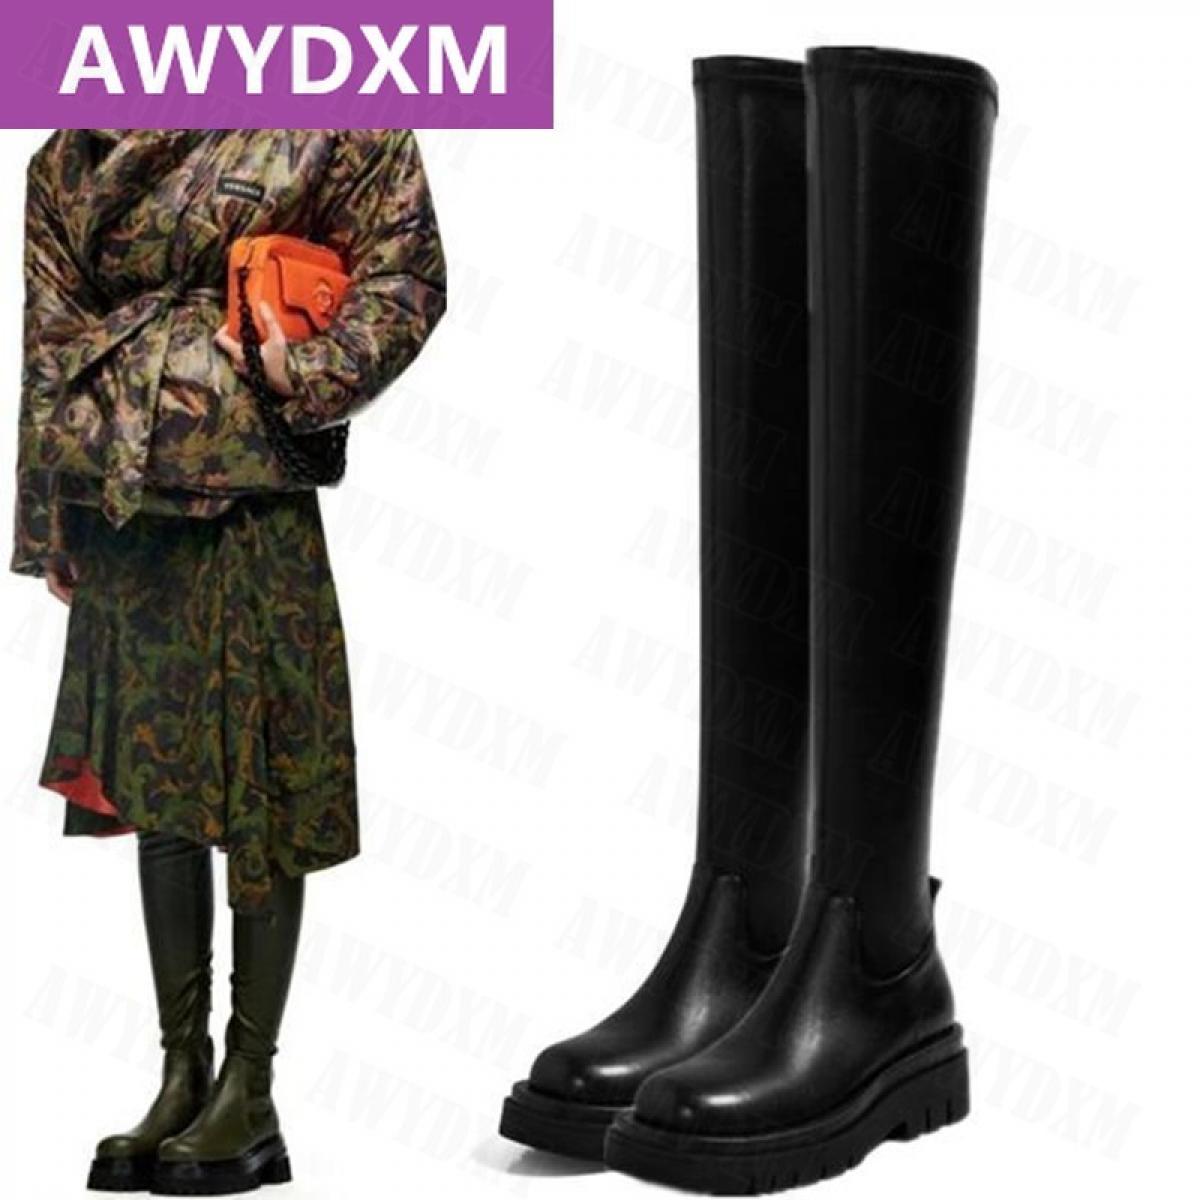 2022 New Winter Snow Non Slip Platform Women Botas Designer  Stretch High Boots Mid Heels Party Over The Knee Warm Shoes